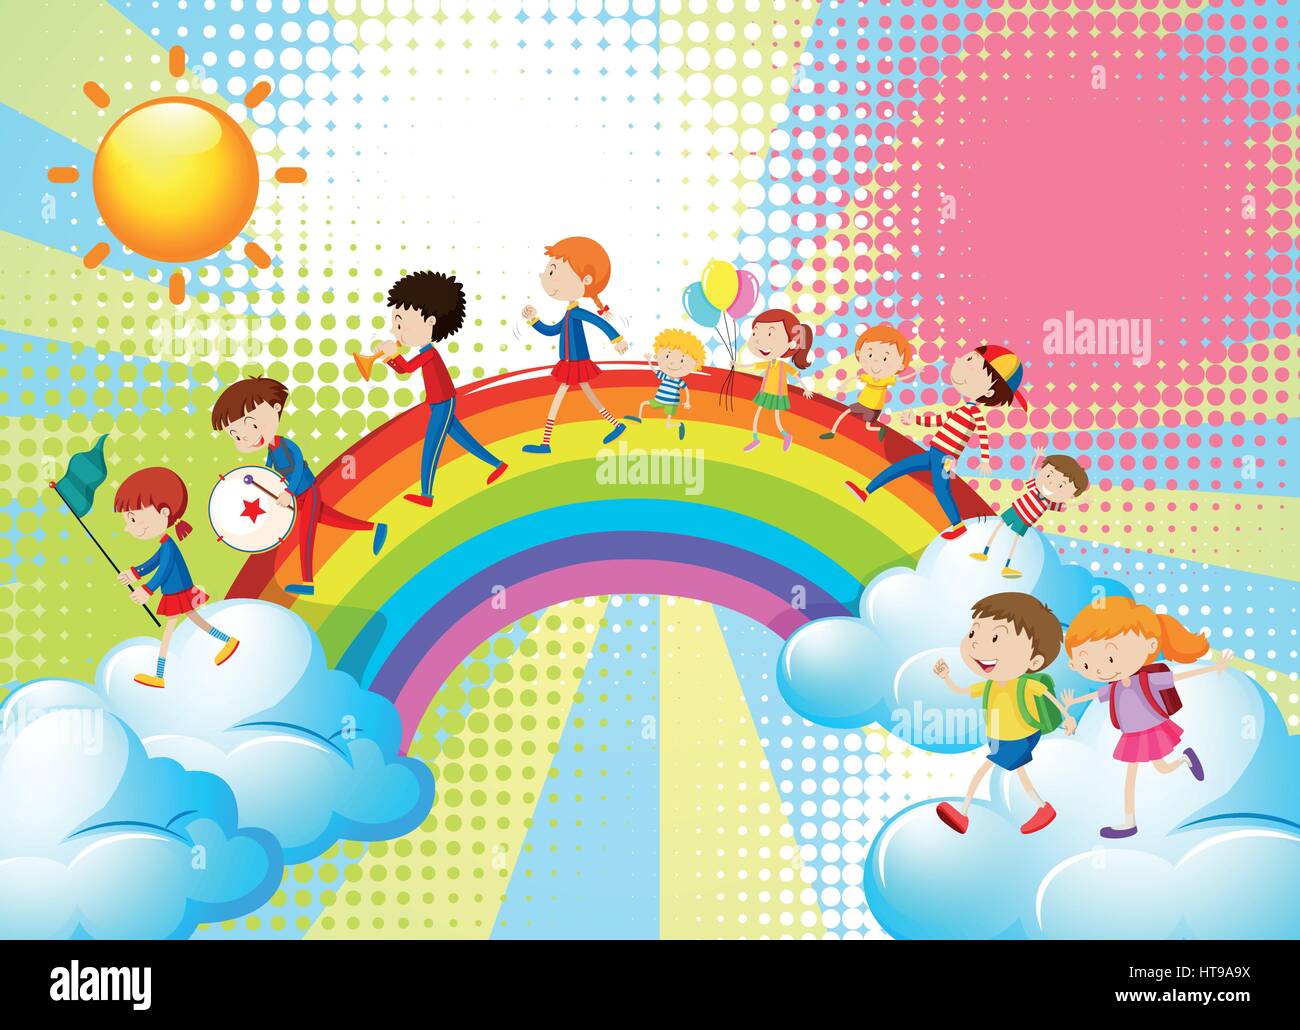 Children playing music in band over the rainbow illustration Stock Vector